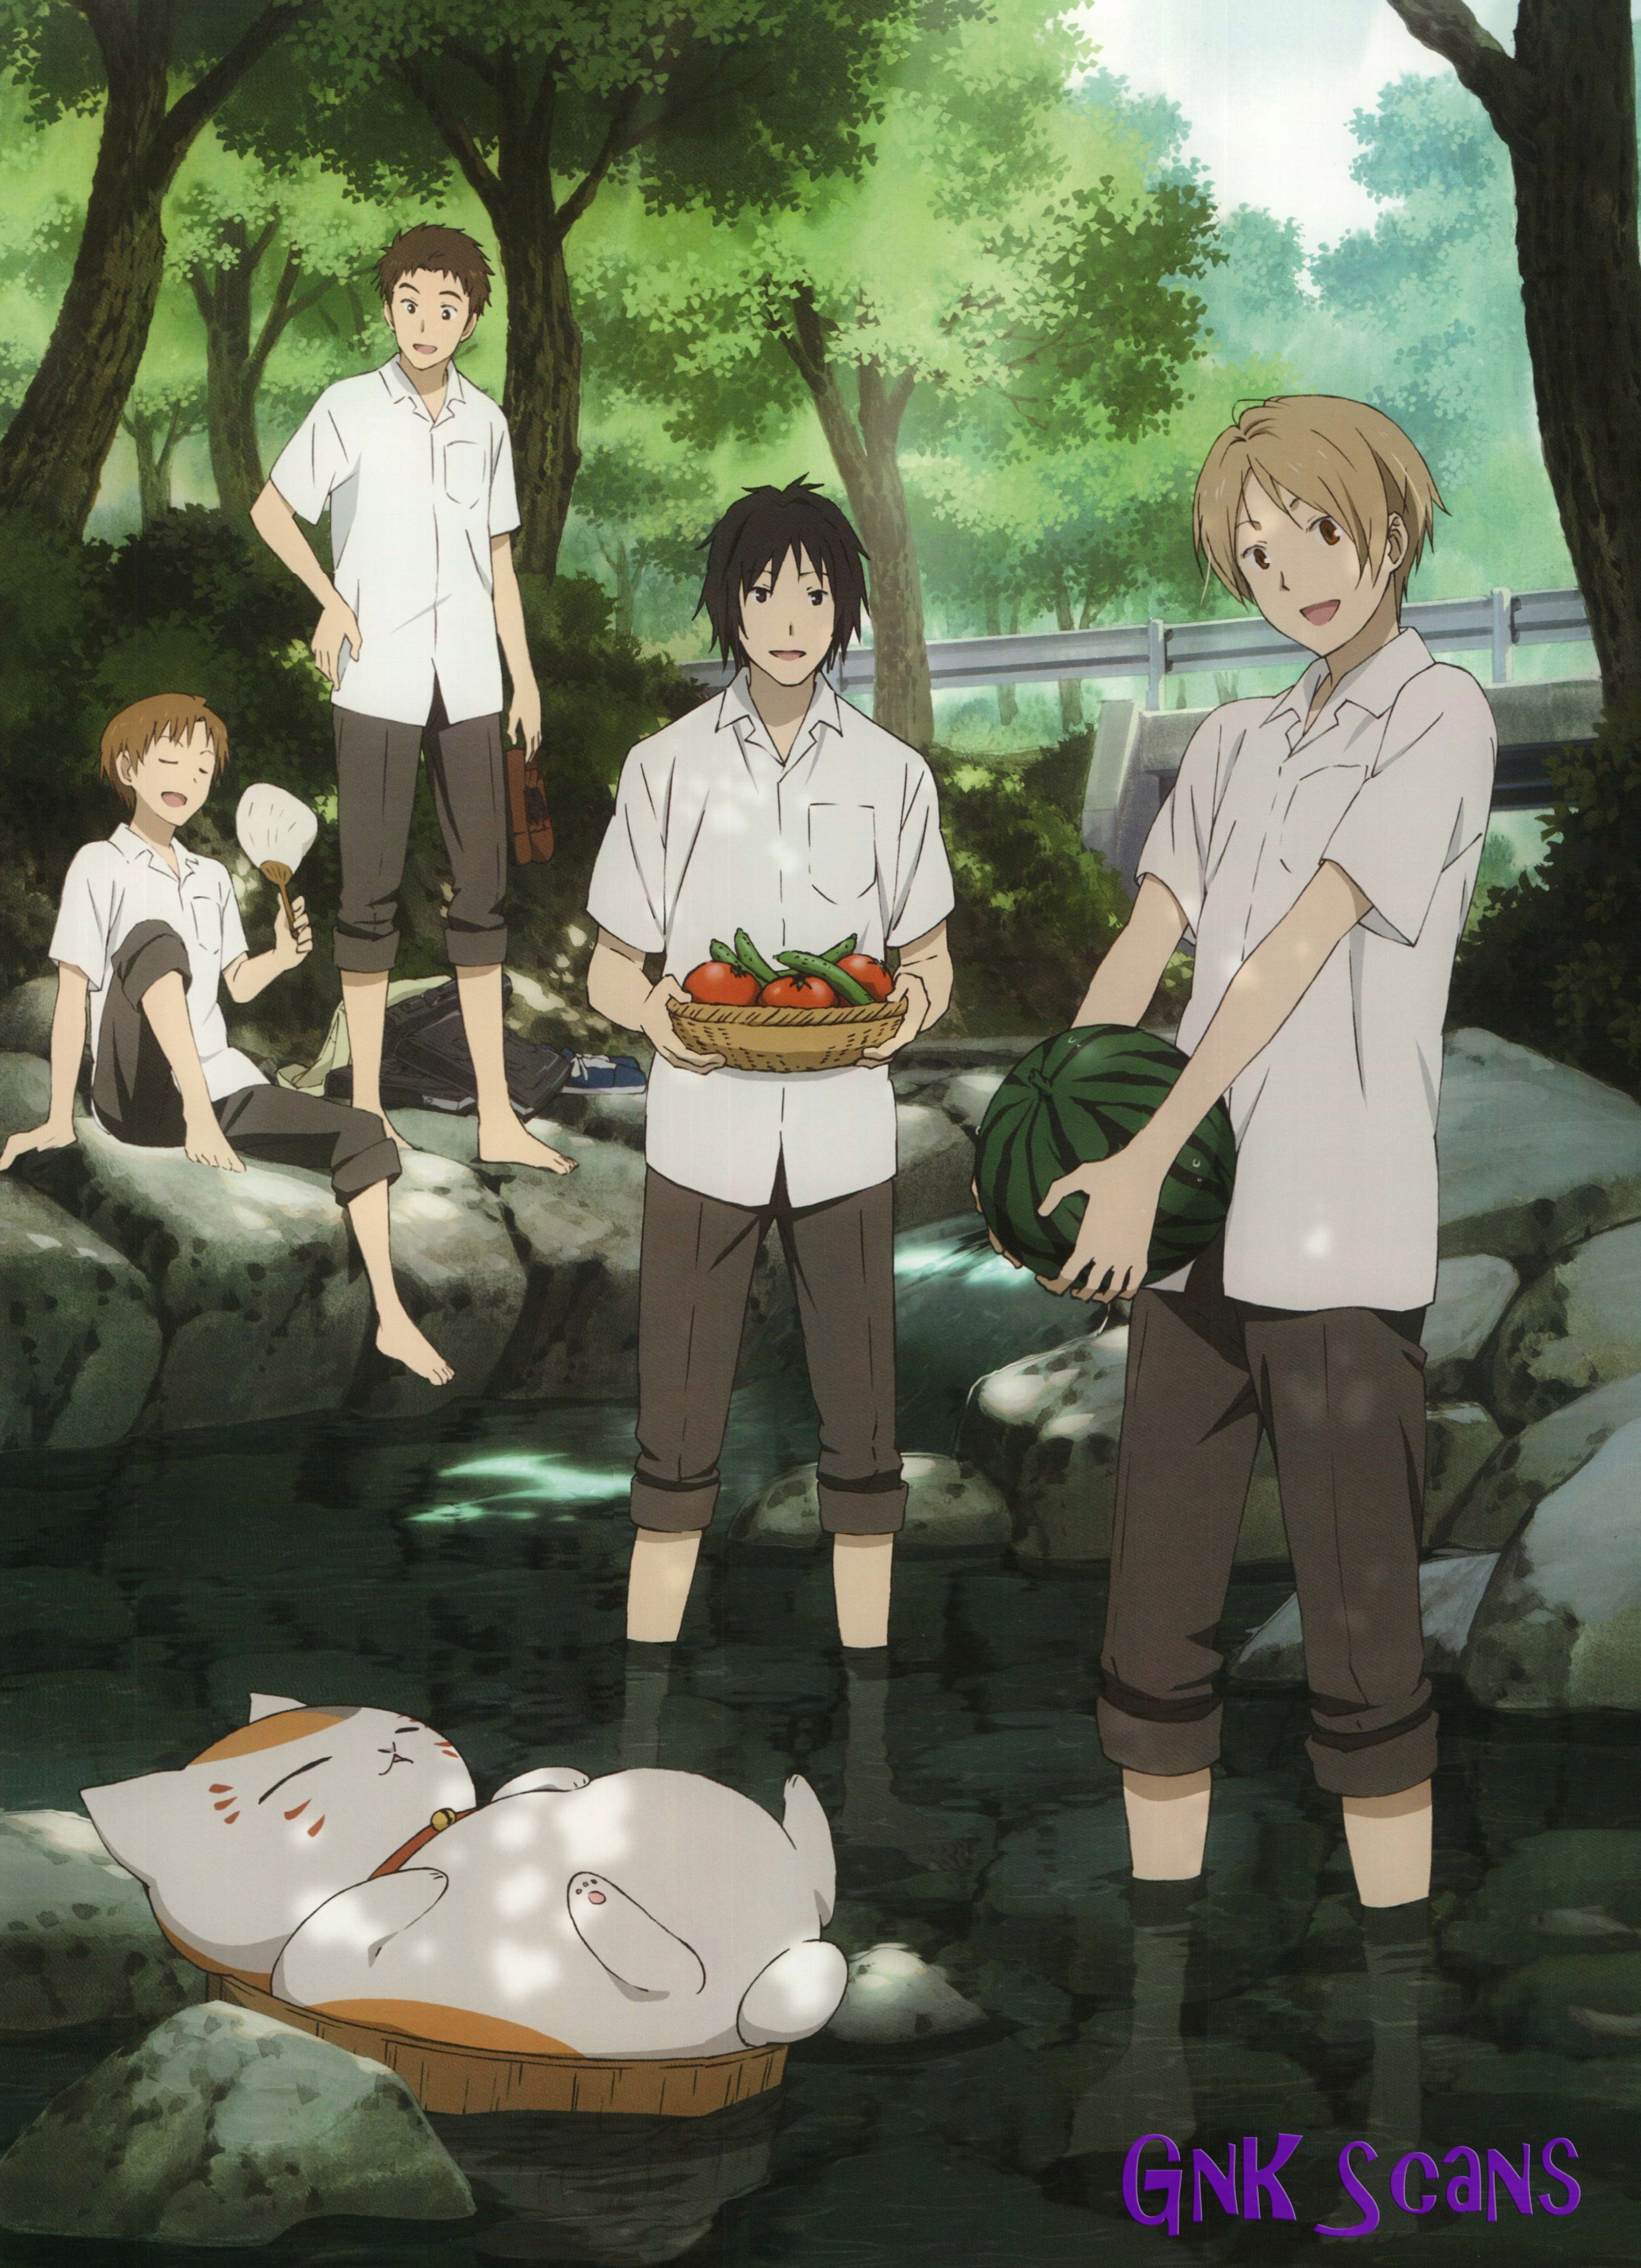 Four Anime Boys Illustration Natsume Book Of Friends Natsume Images, Photos, Reviews